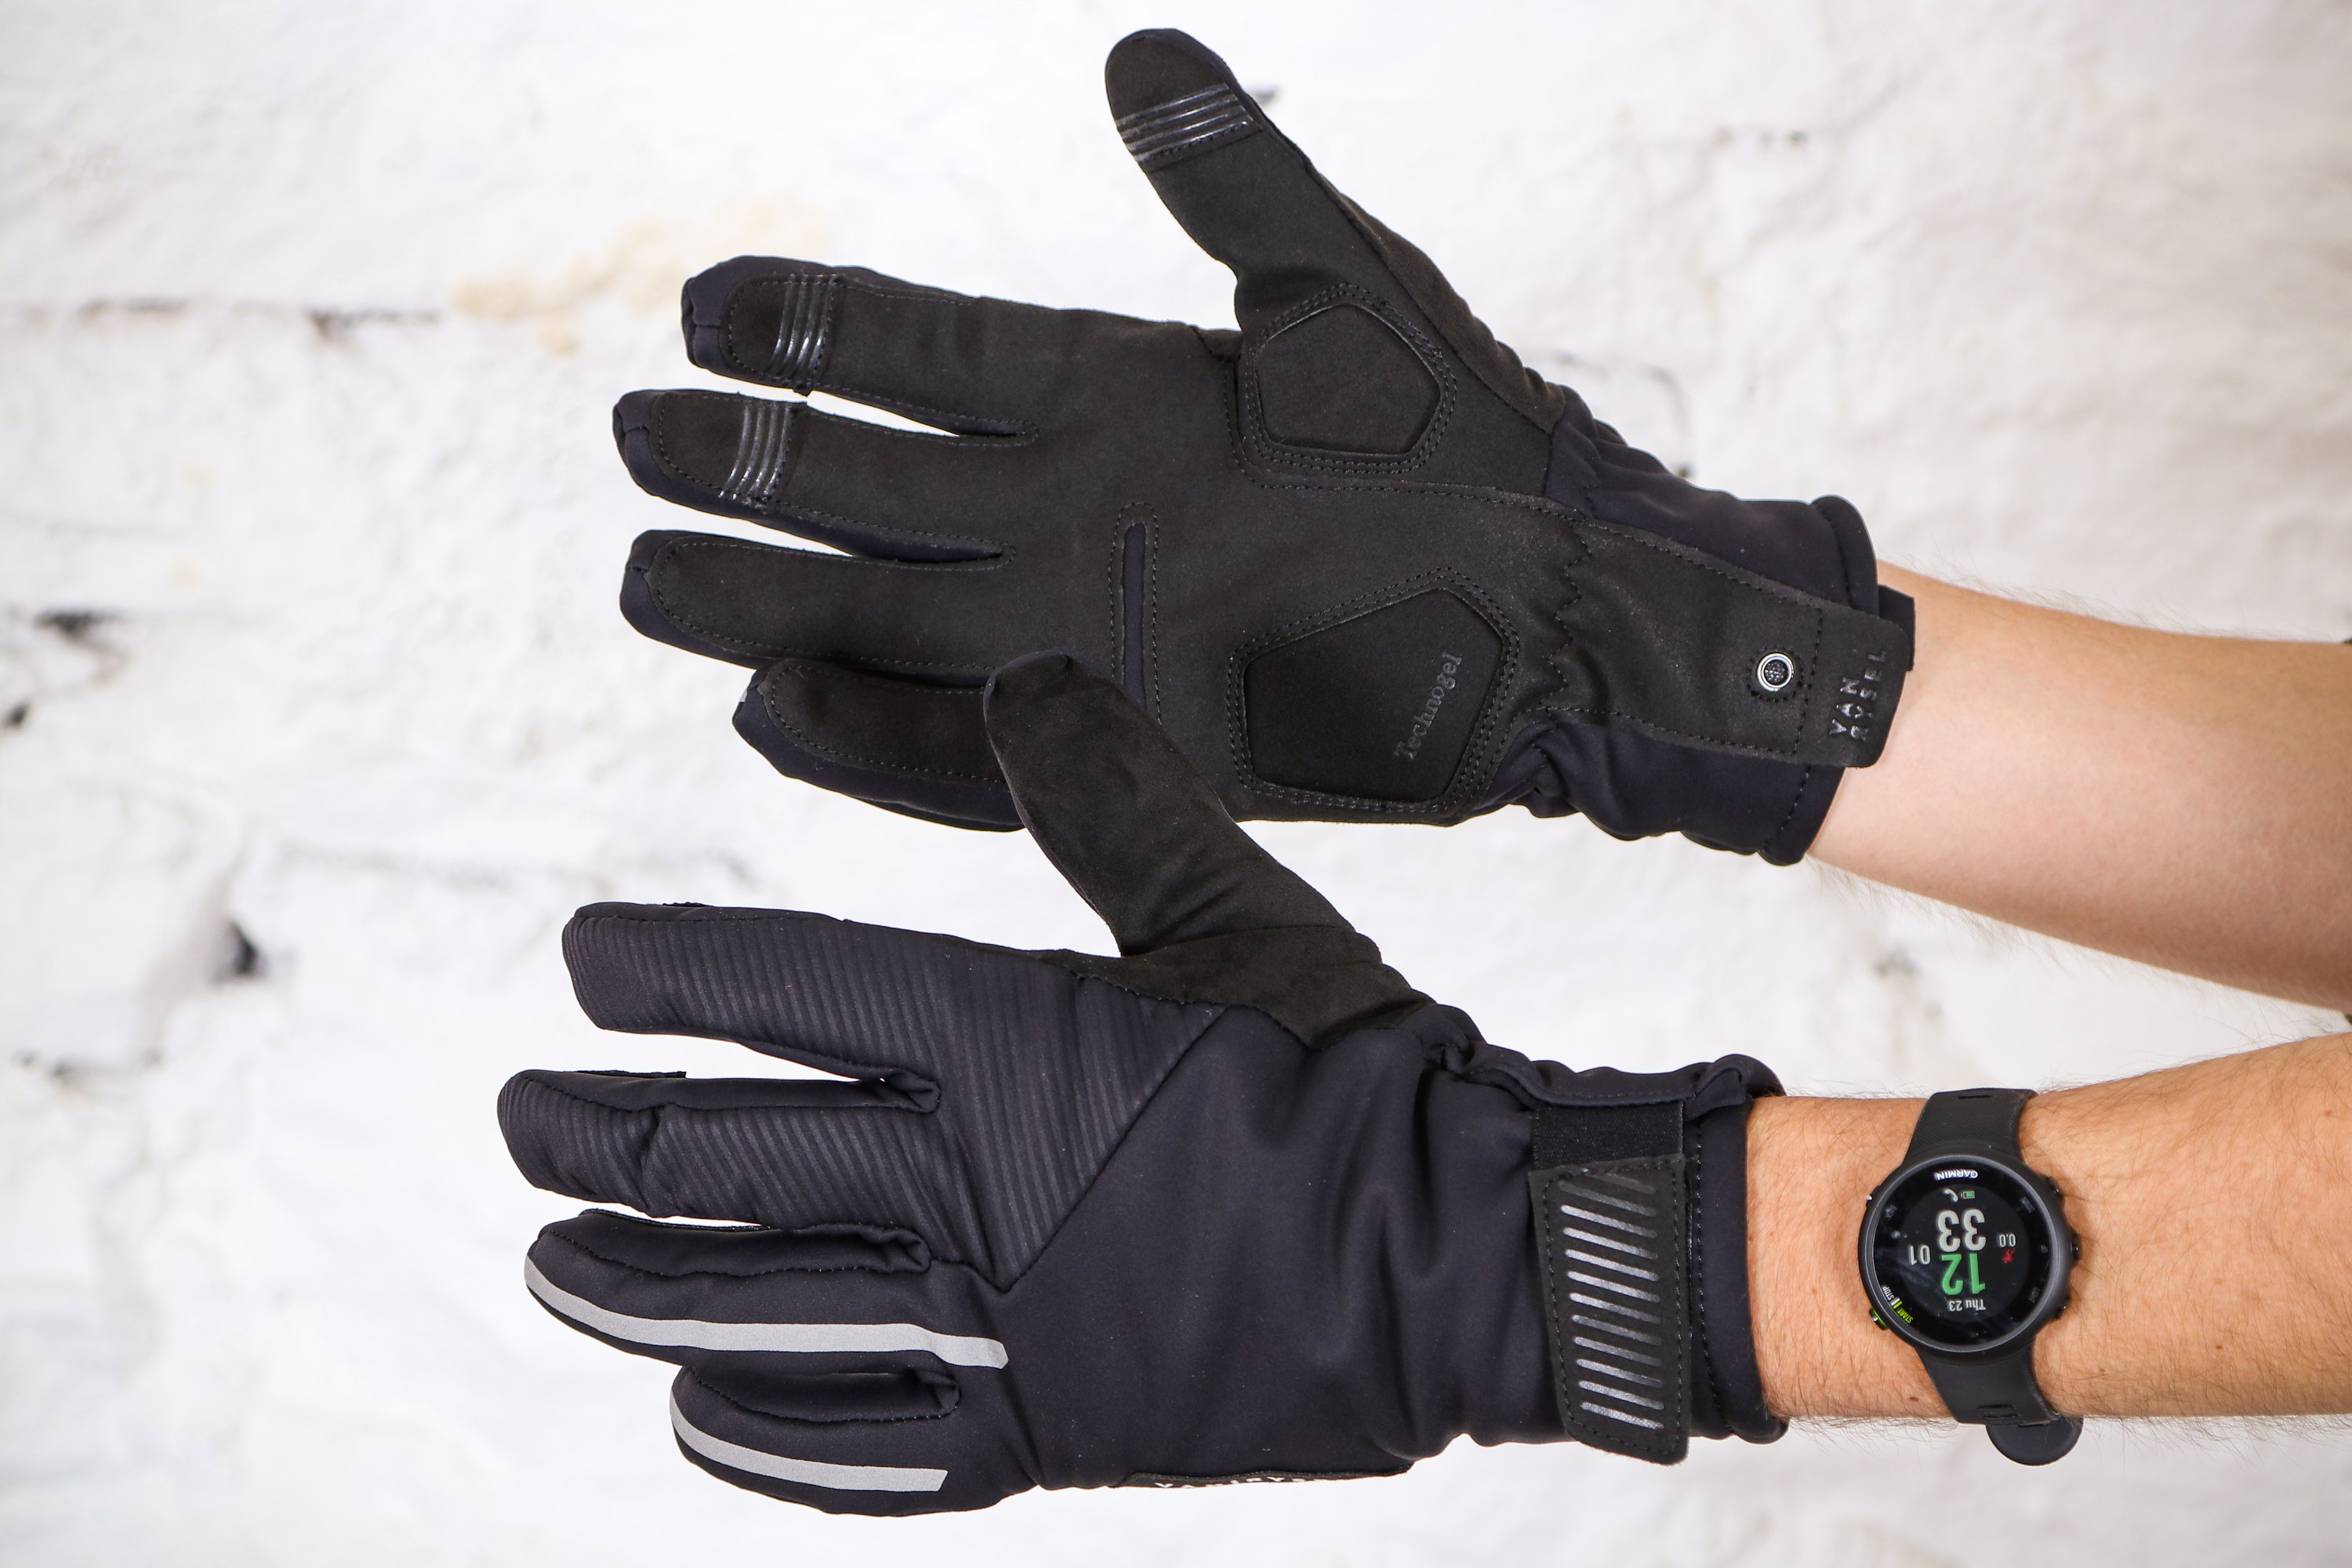 warm winter cycling gloves